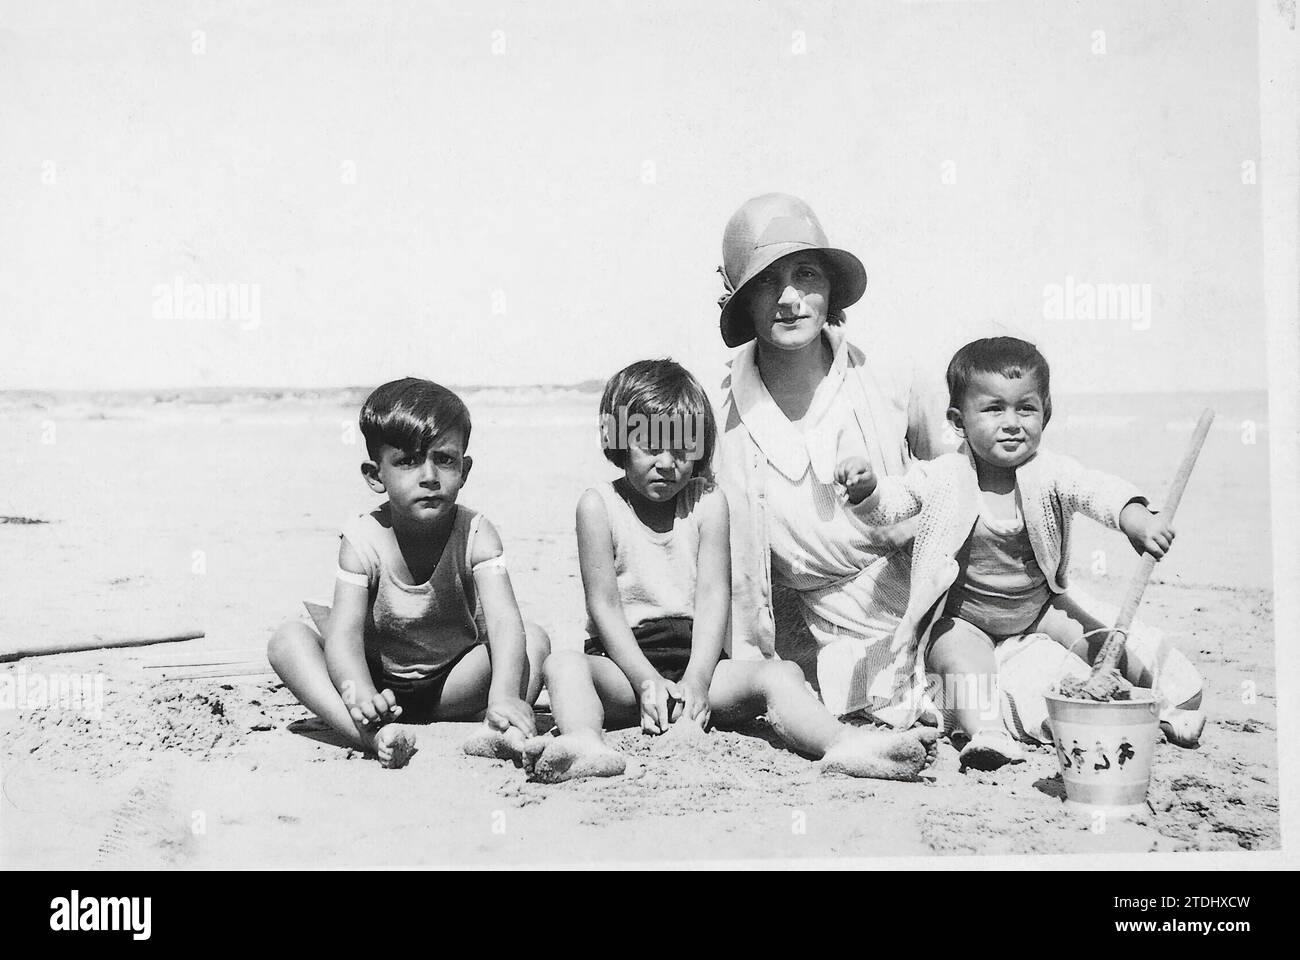 Leopoldo Calvo Sotelo with his Mother, Mercedes Bustelo, and his Sisters on Reinante beach, in 1930. Credit: Album / Archivo ABC Stock Photo